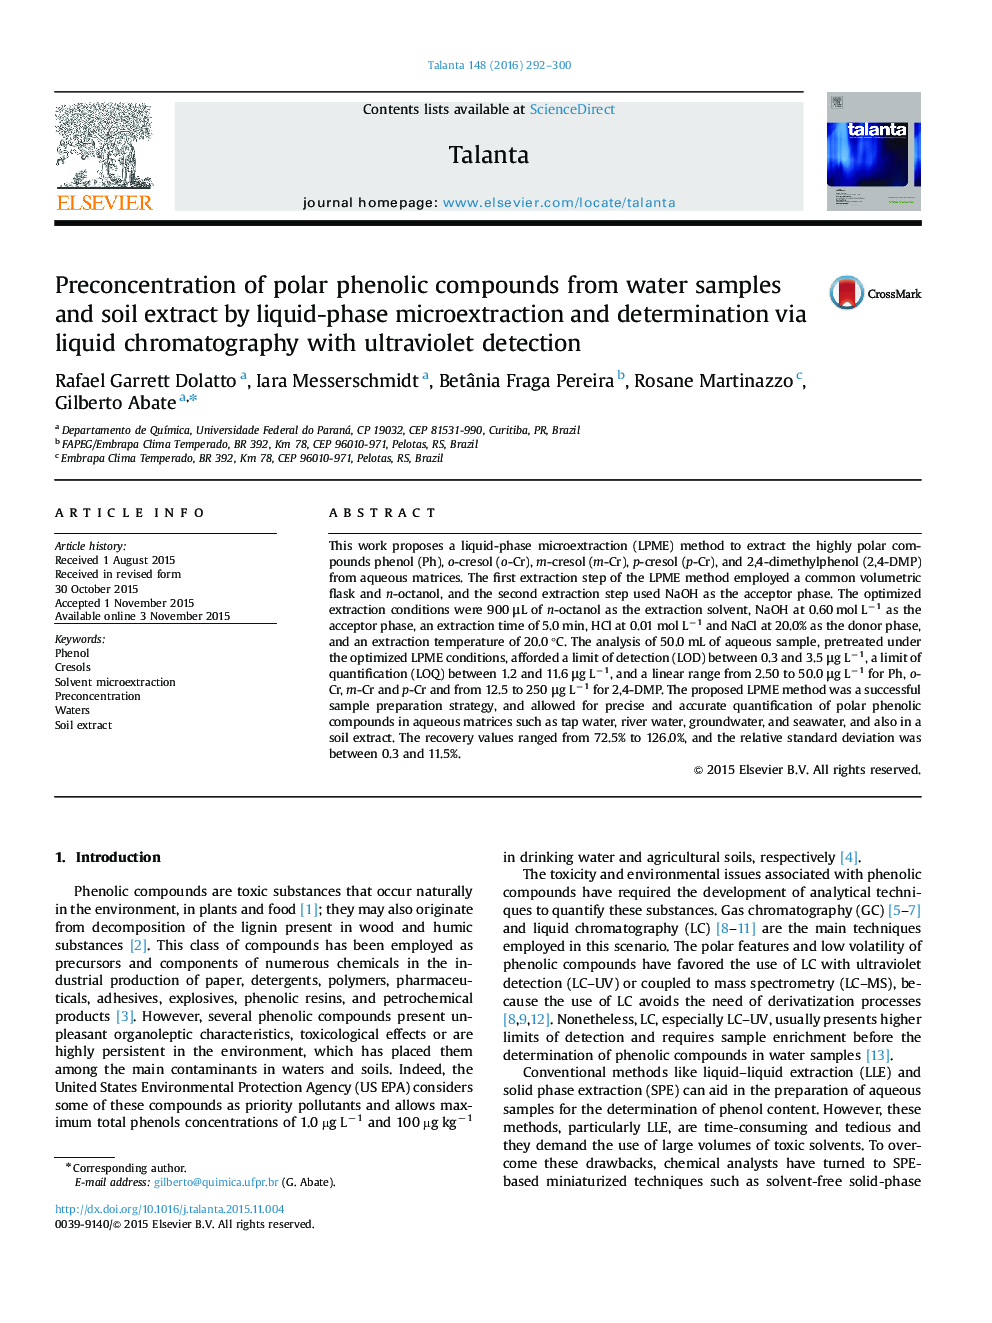 Preconcentration of polar phenolic compounds from water samples and soil extract by liquid-phase microextraction and determination via liquid chromatography with ultraviolet detection